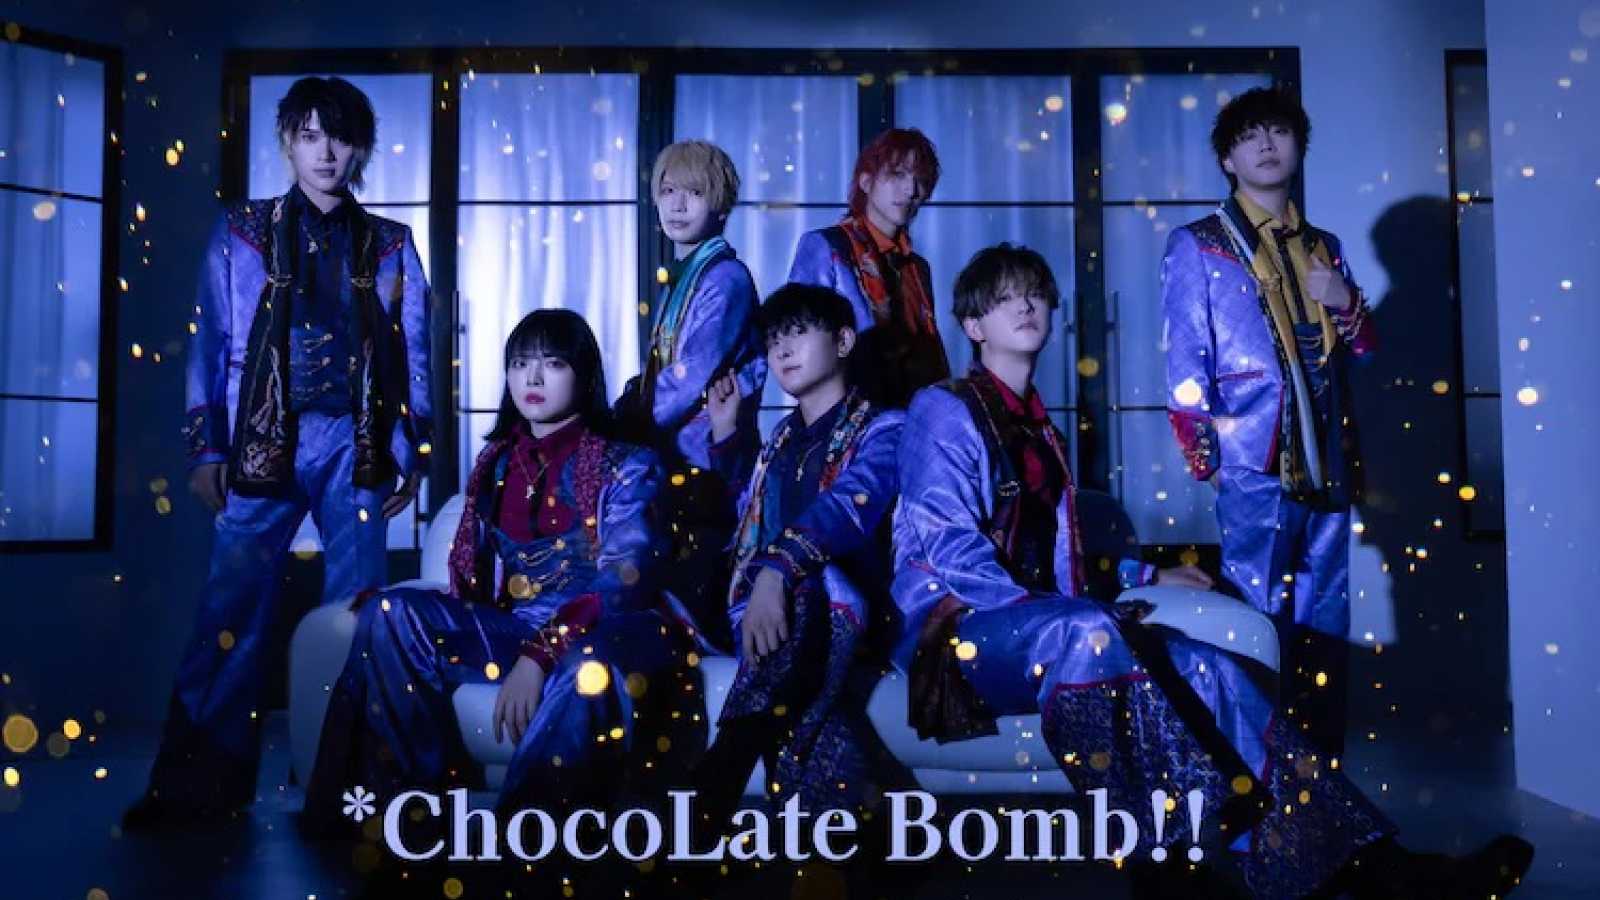 *CHOCOLATE BOMB!! © *ChocoLate Bomb!! All rights reserved.